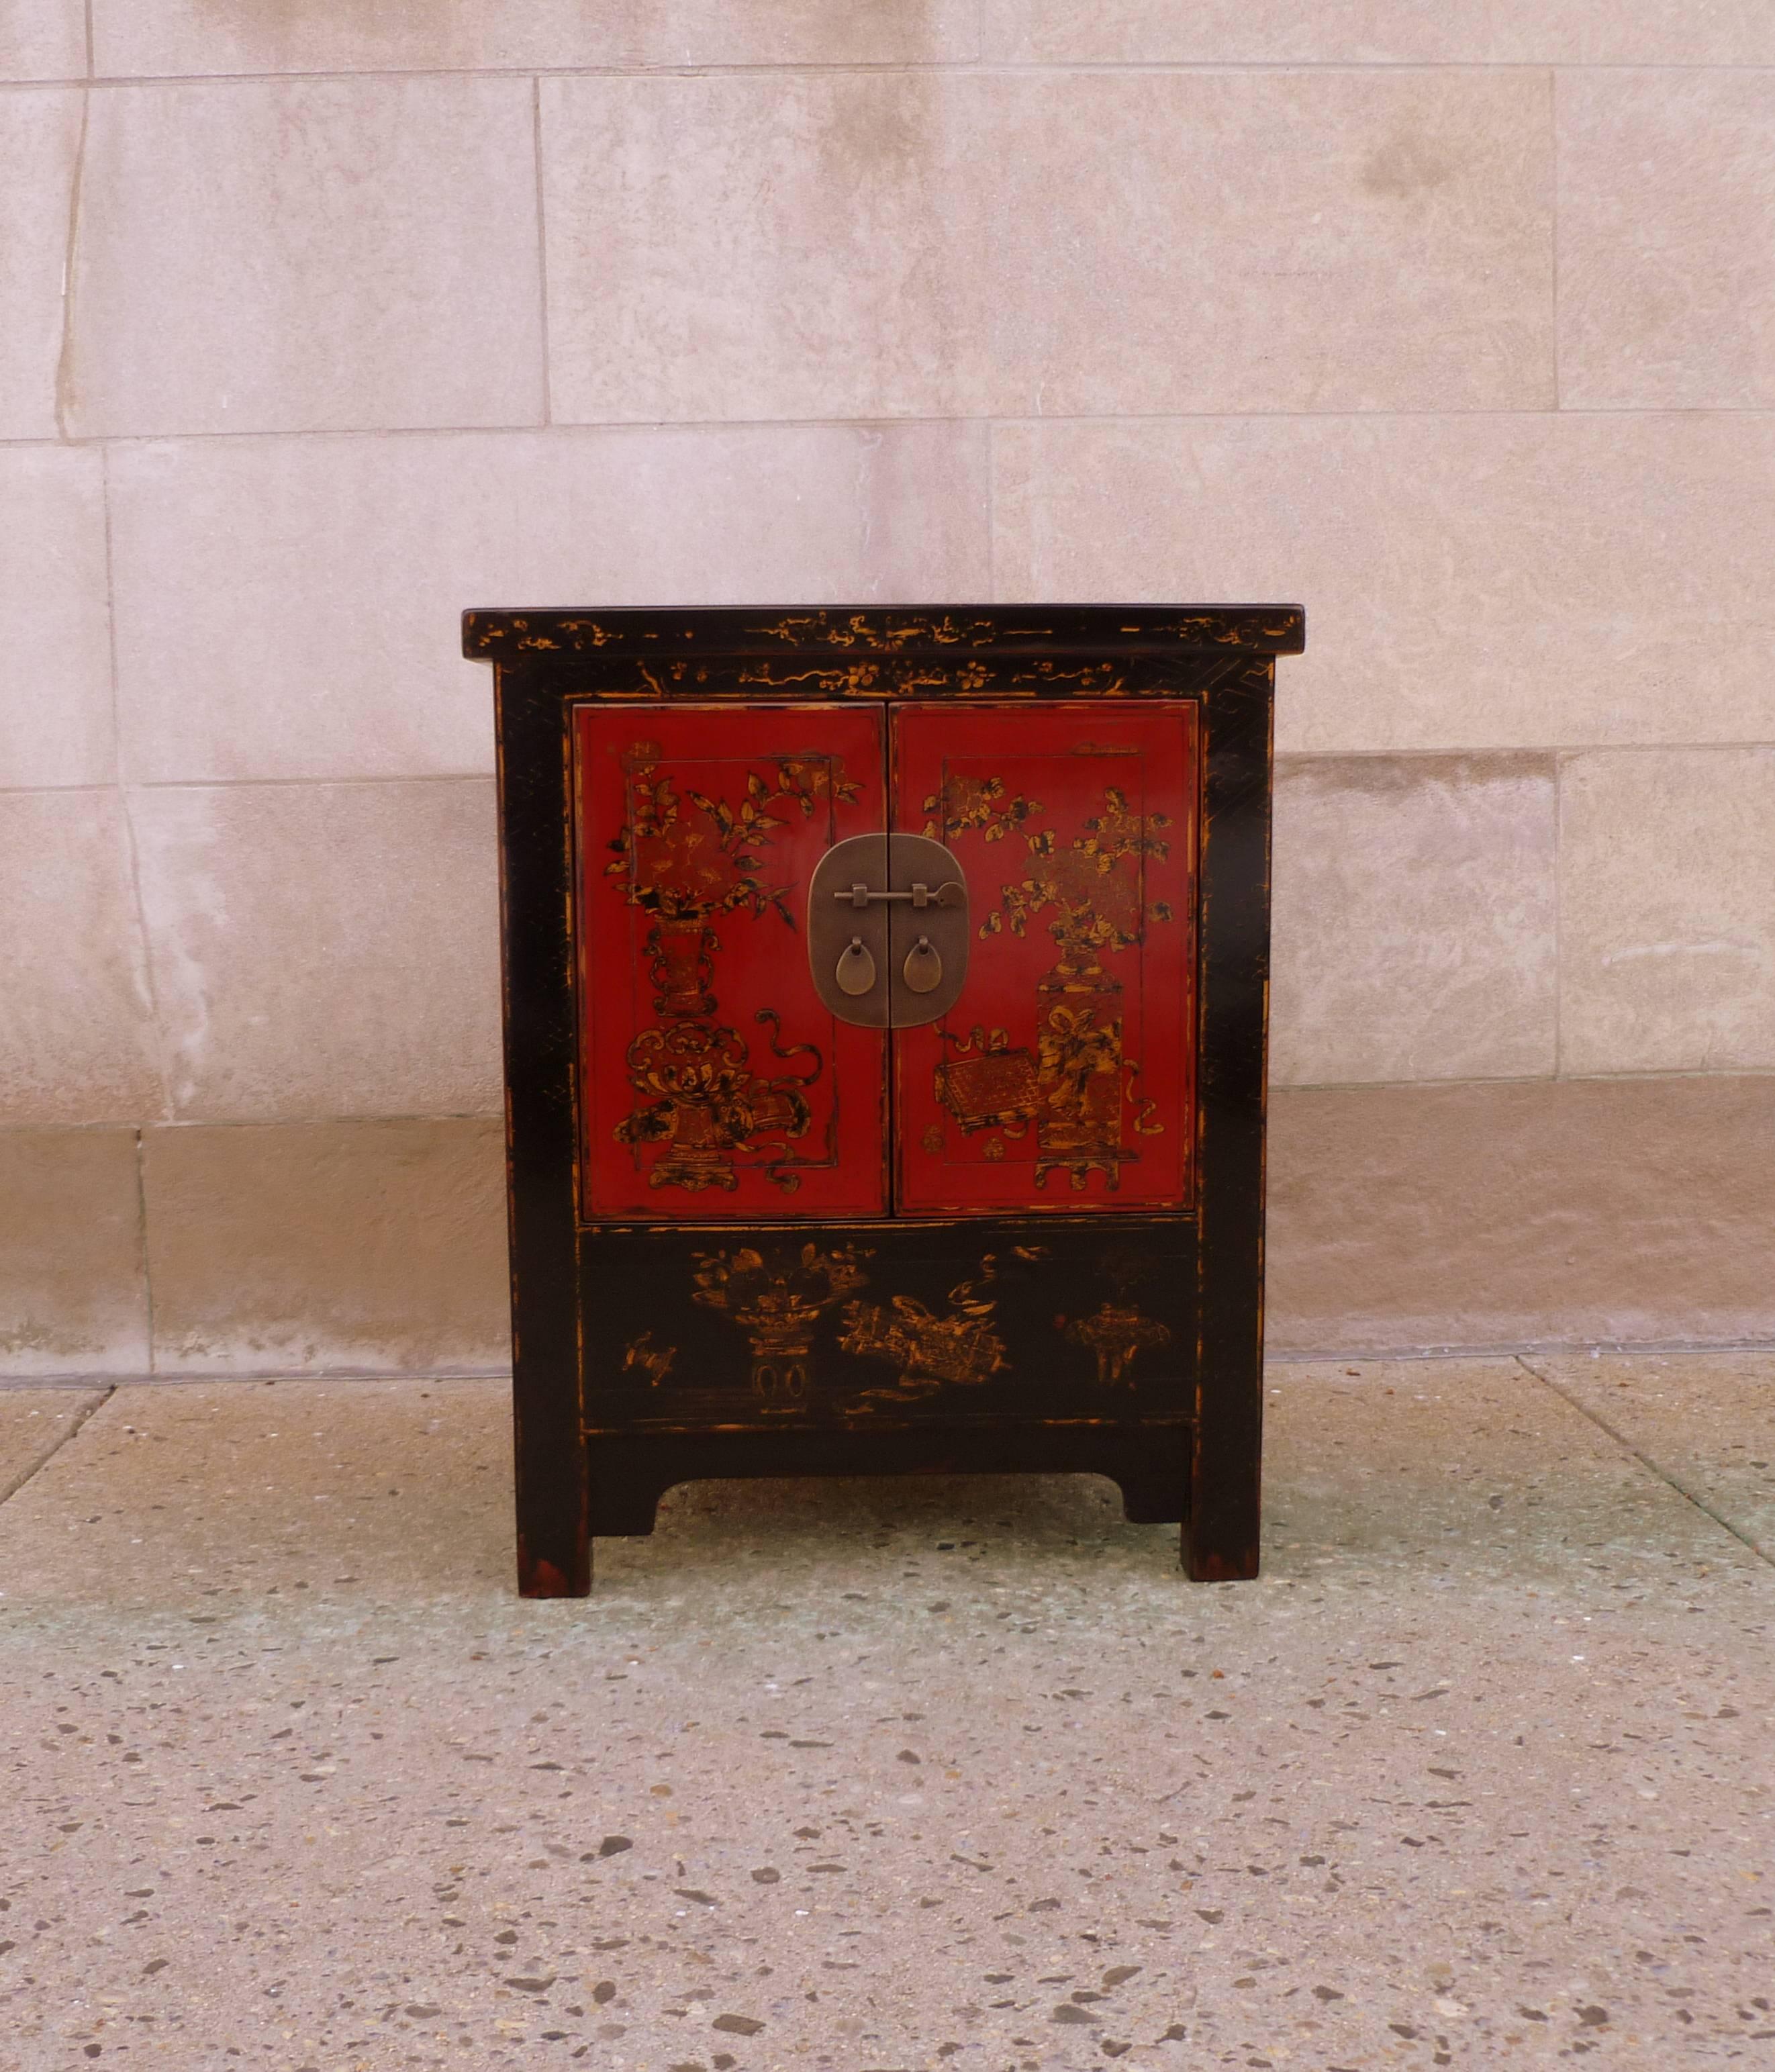 Very elegant chest, of upright form, black lacquer with red lacquer doors muted gold gilt flowers motif on the front side, brass fitting.  We carry fine quality furniture with elegant finished and has been appeared many times in 